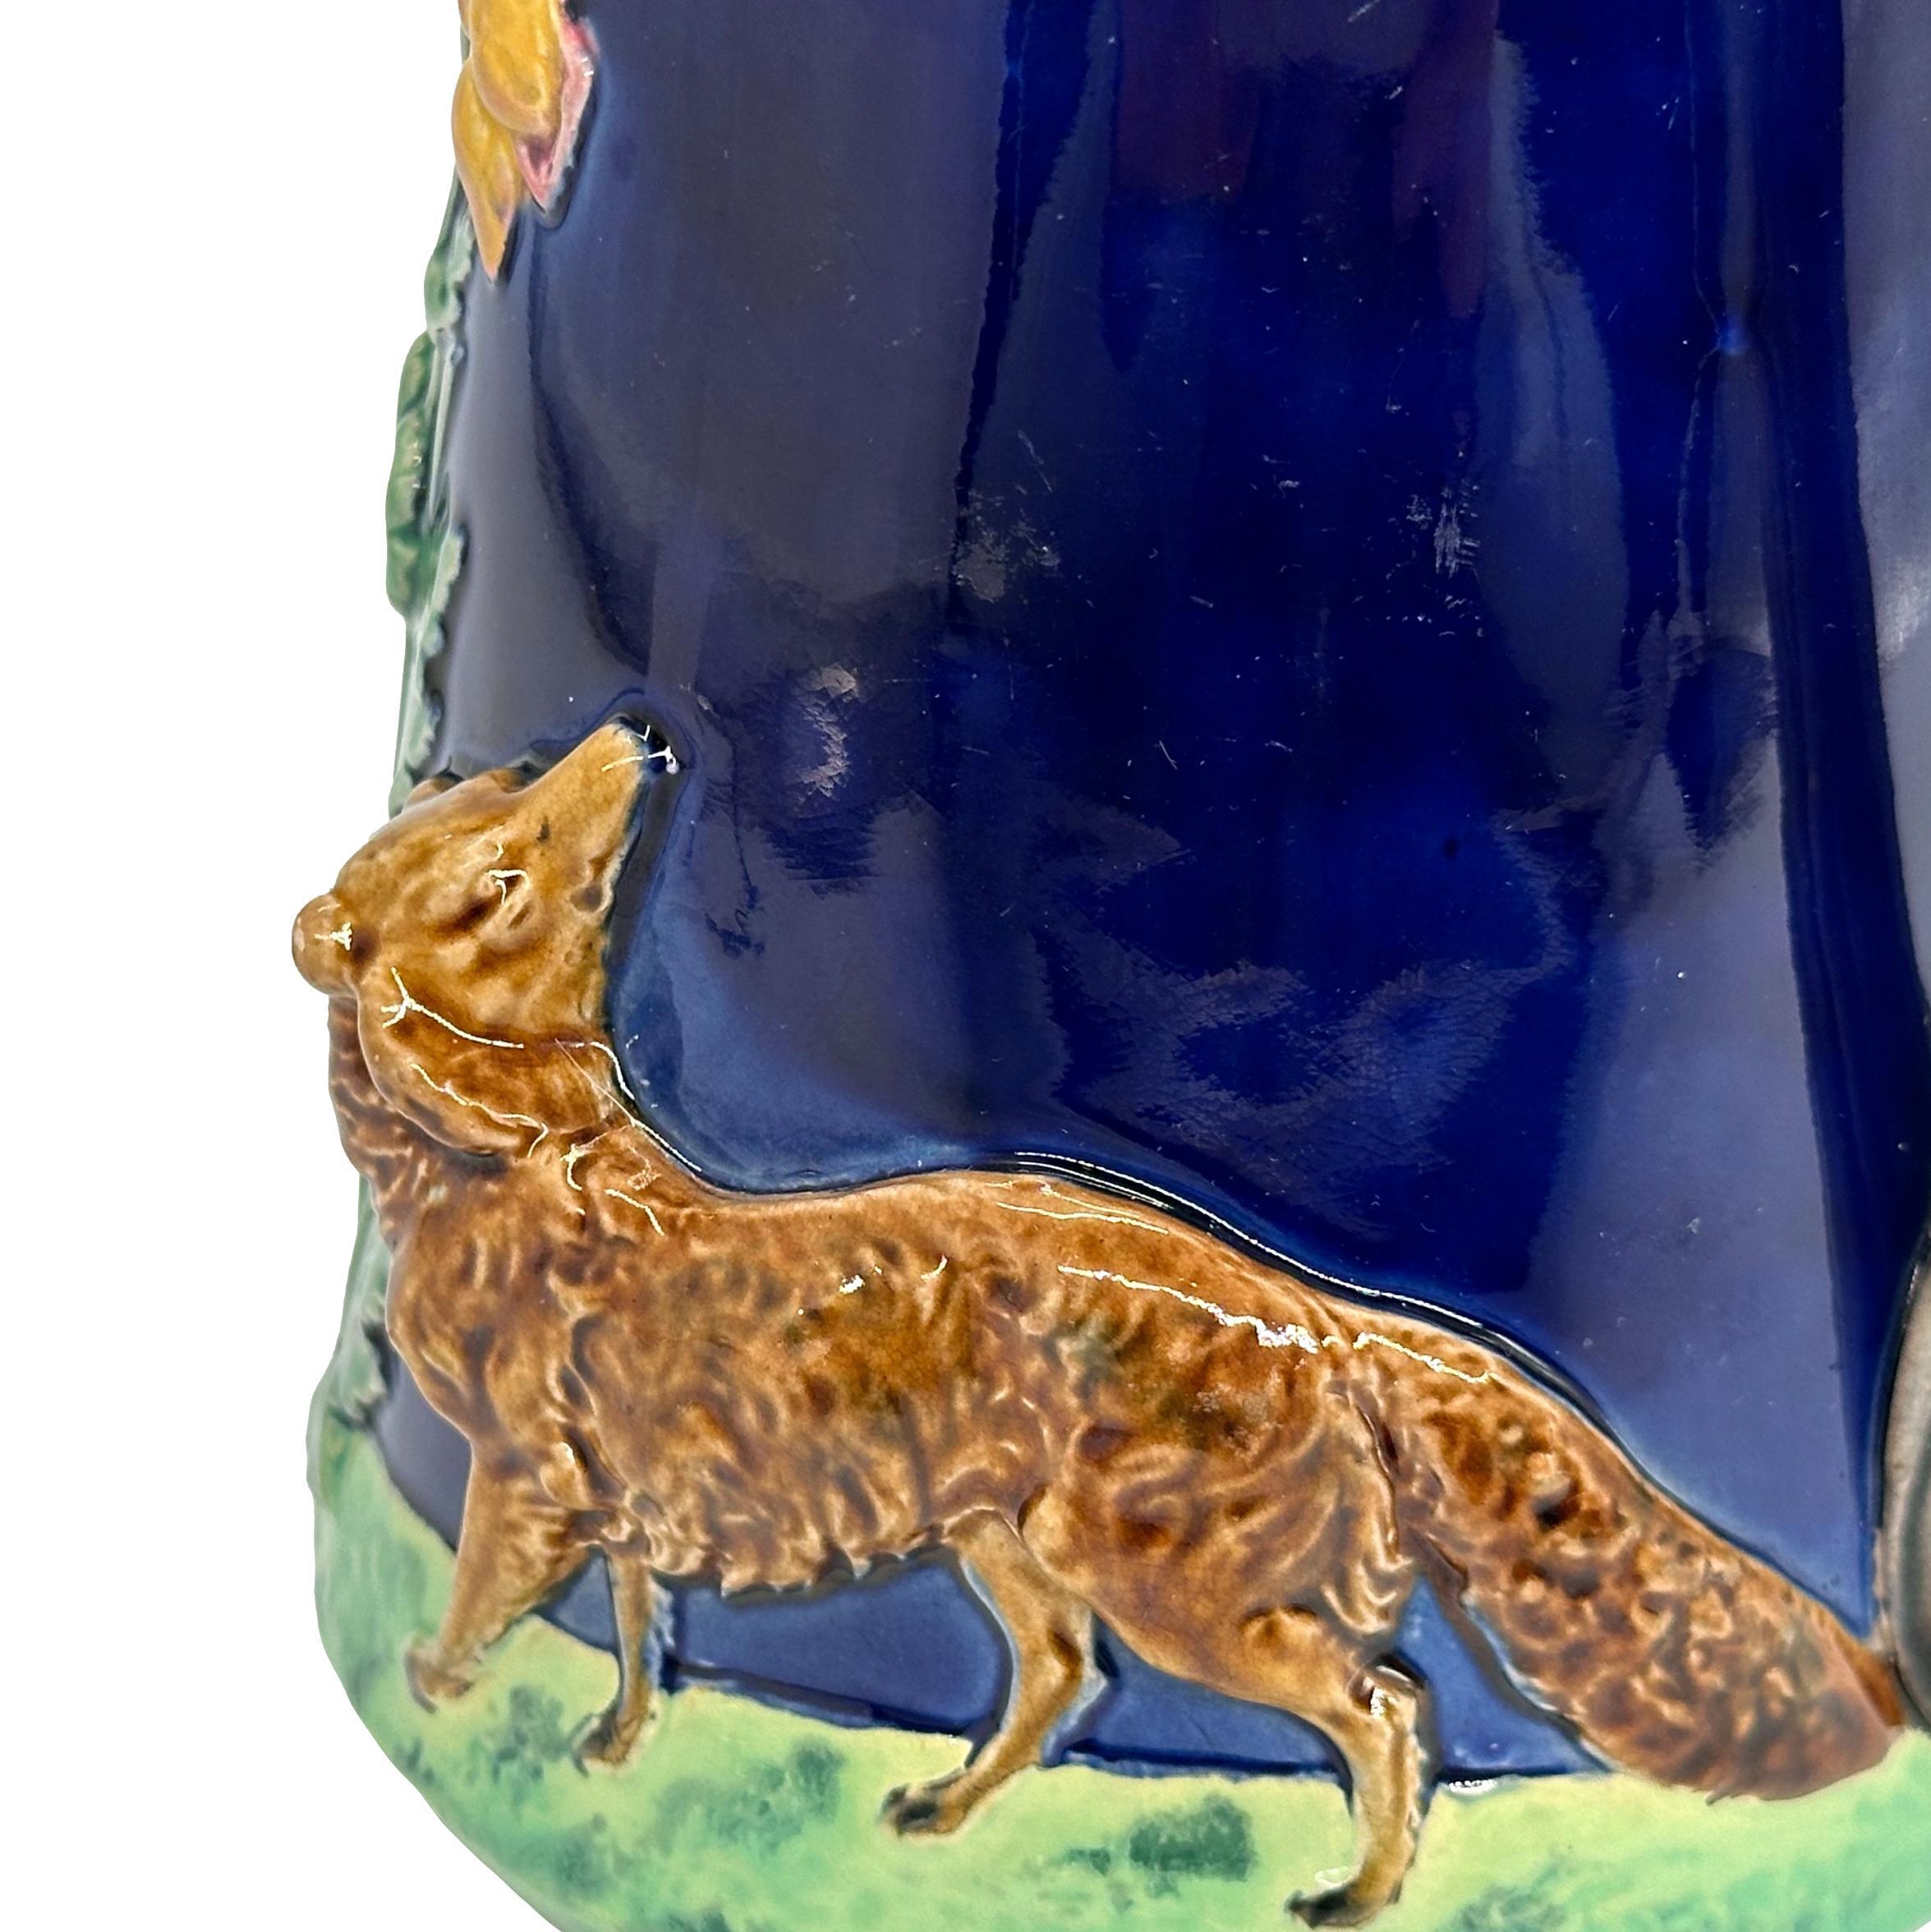 A BWM Majolica Jug Depicting 'The Fox and the Grapers' Aesop's Fable, ca. 1876 In Good Condition For Sale In Banner Elk, NC